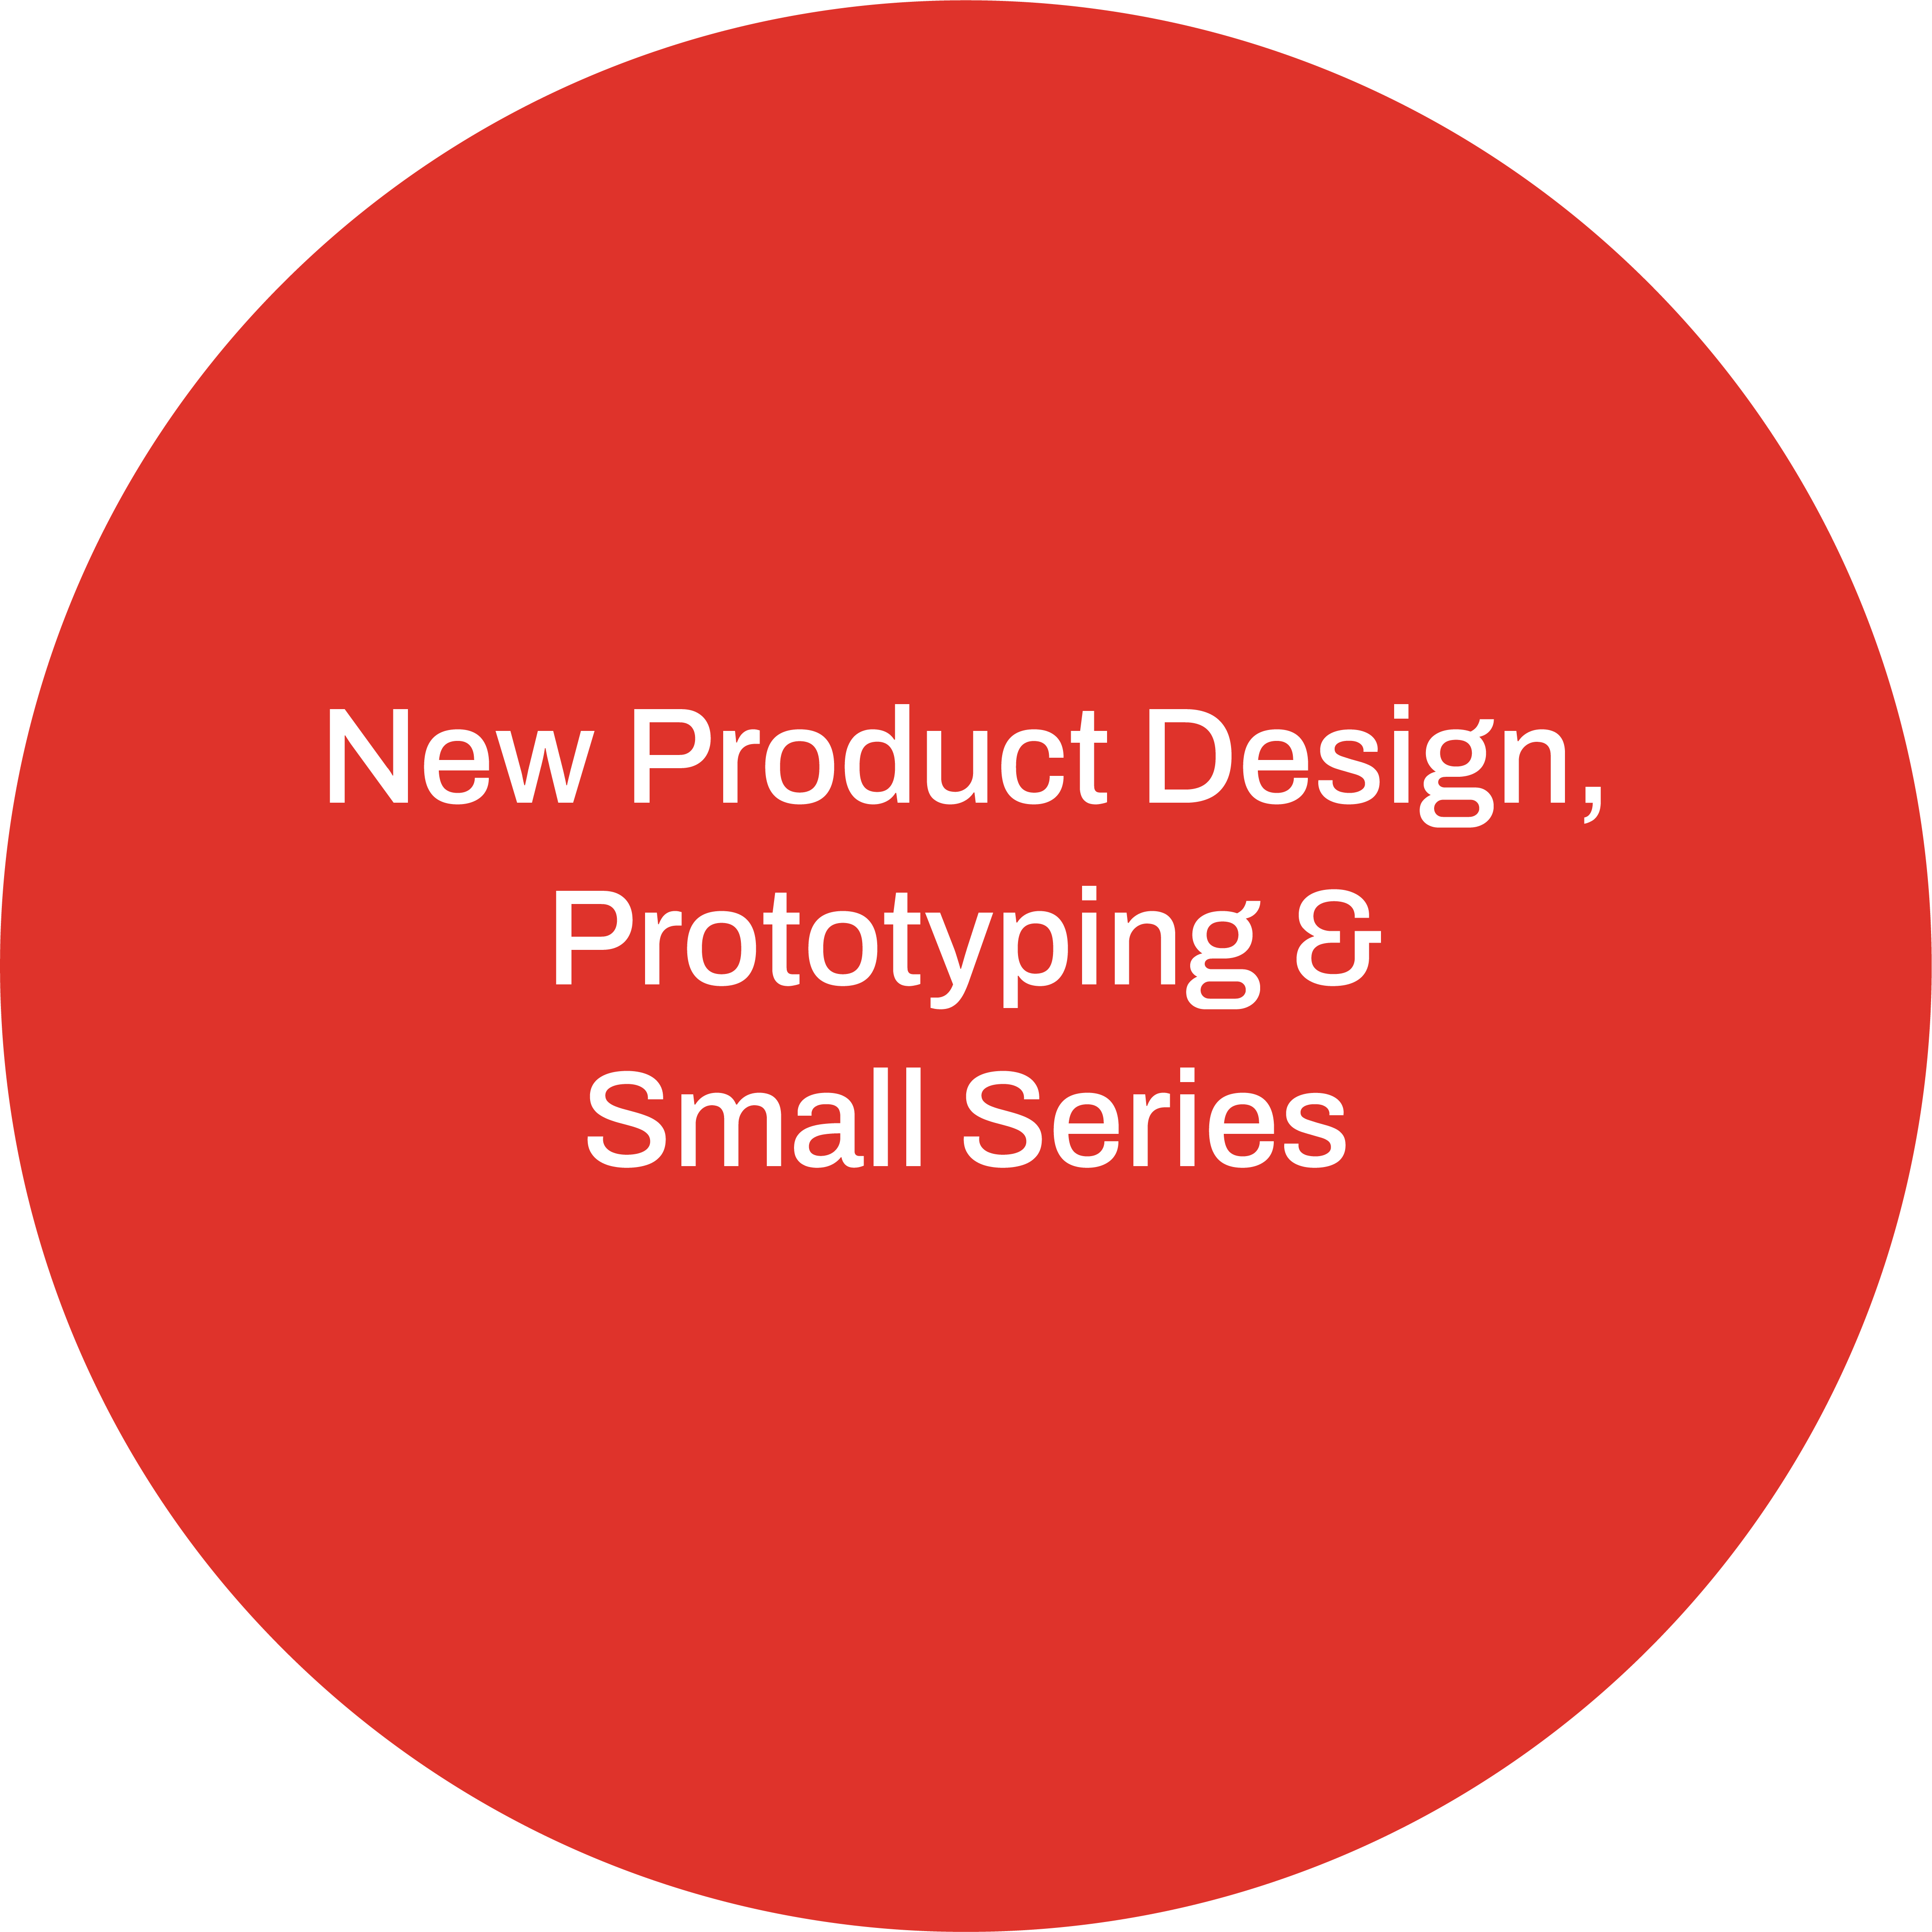 new product design, prototyping & small series graphic illustration